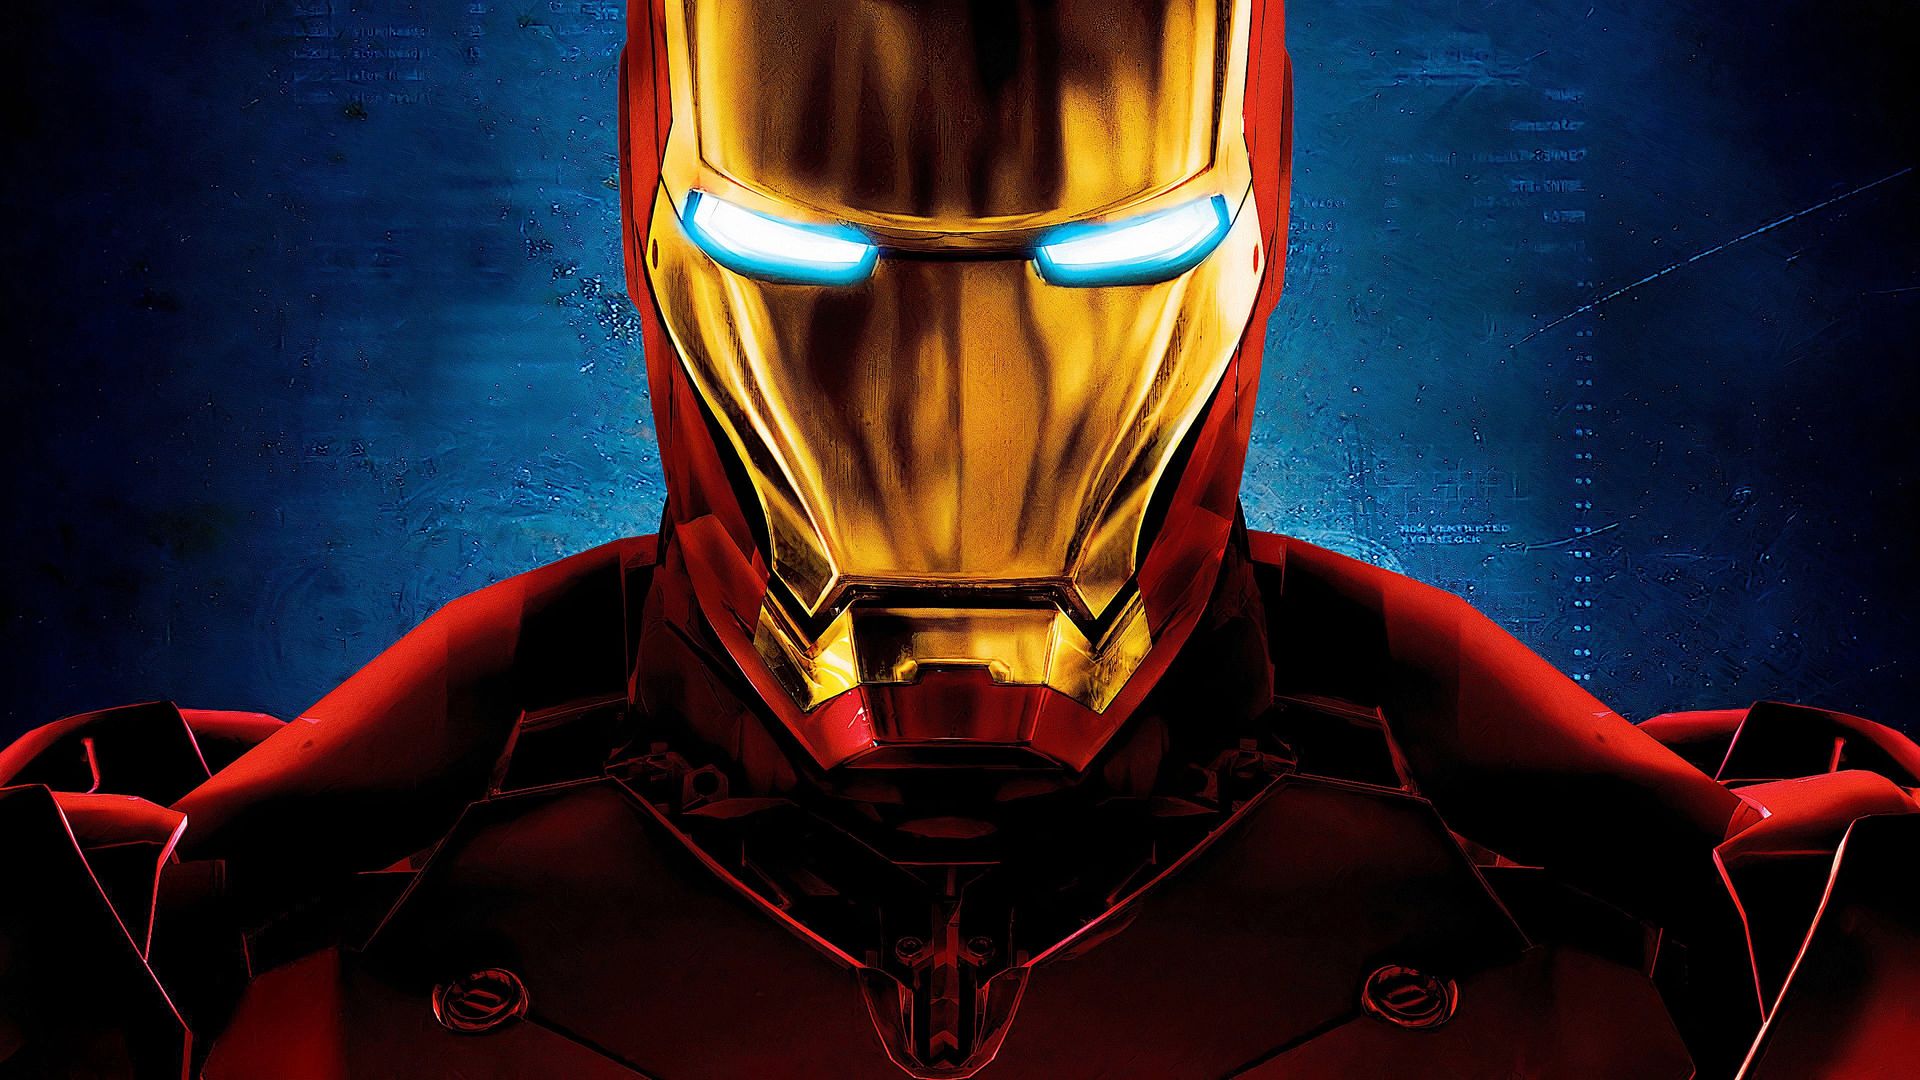 The Invincible 'Iron Man' background